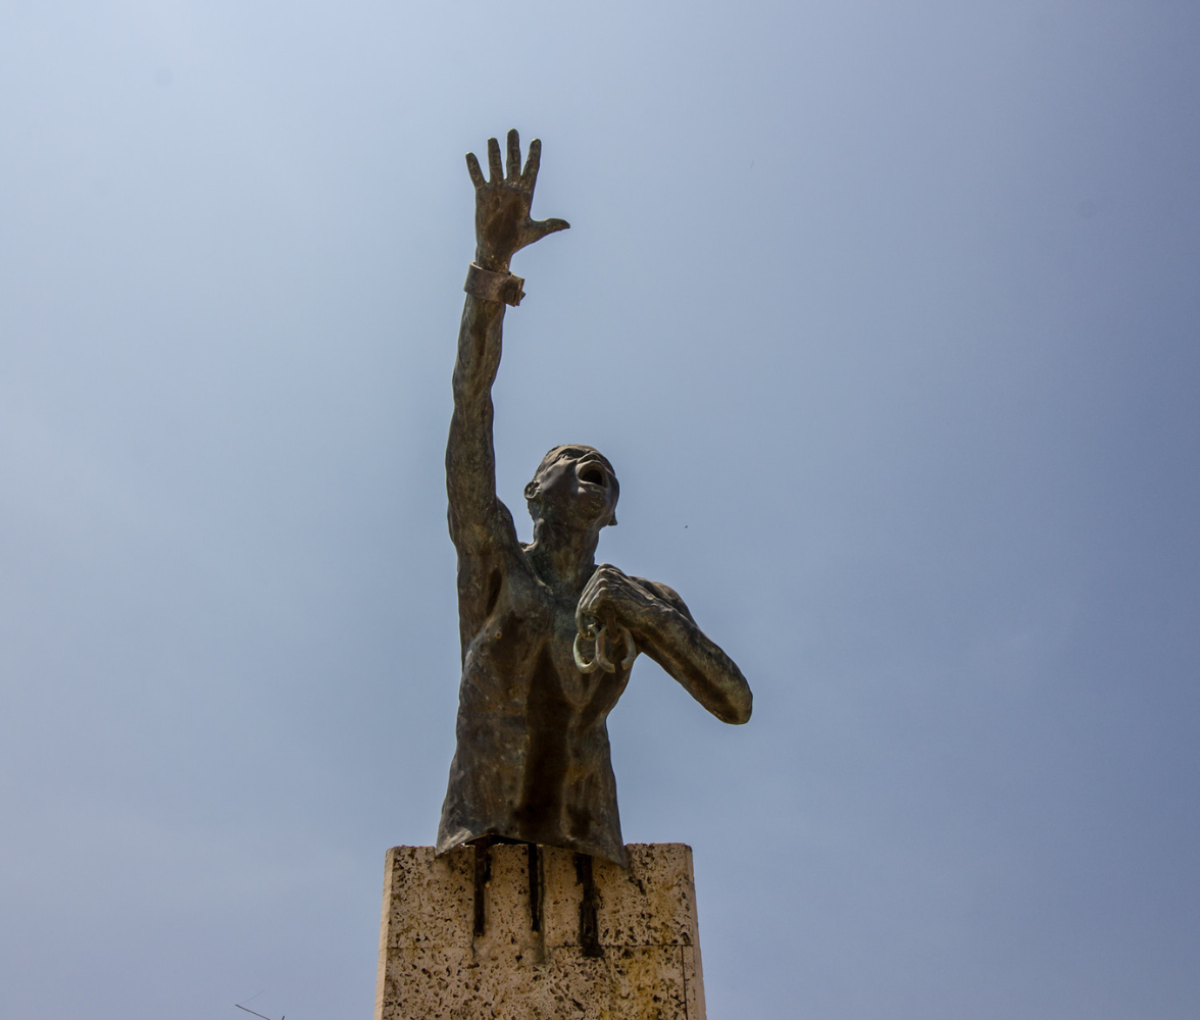 Statue of Benkos Biohó, the former slave who founded the town of San Basilio de Palenque